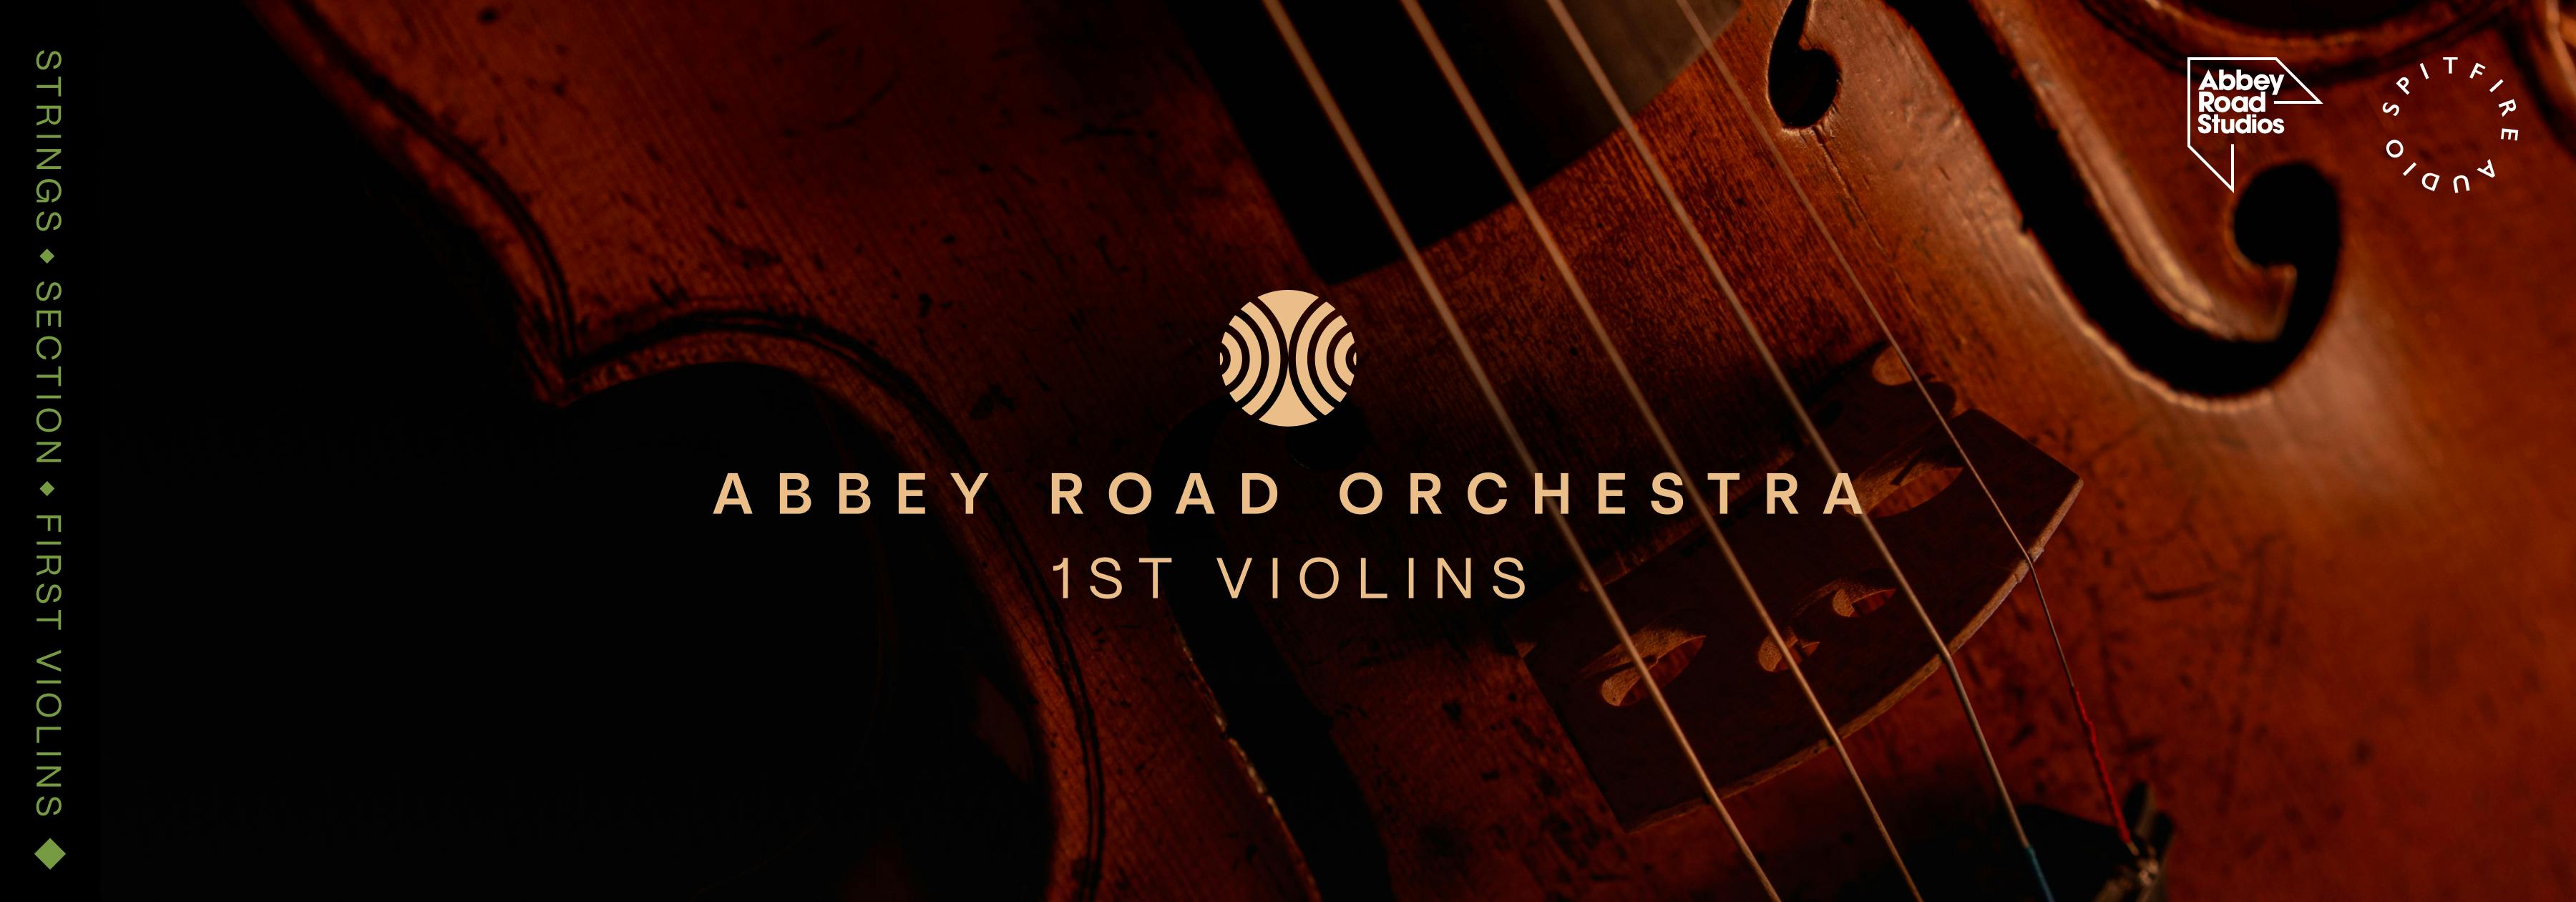 Abbey Road Orchestra: 1st Violins